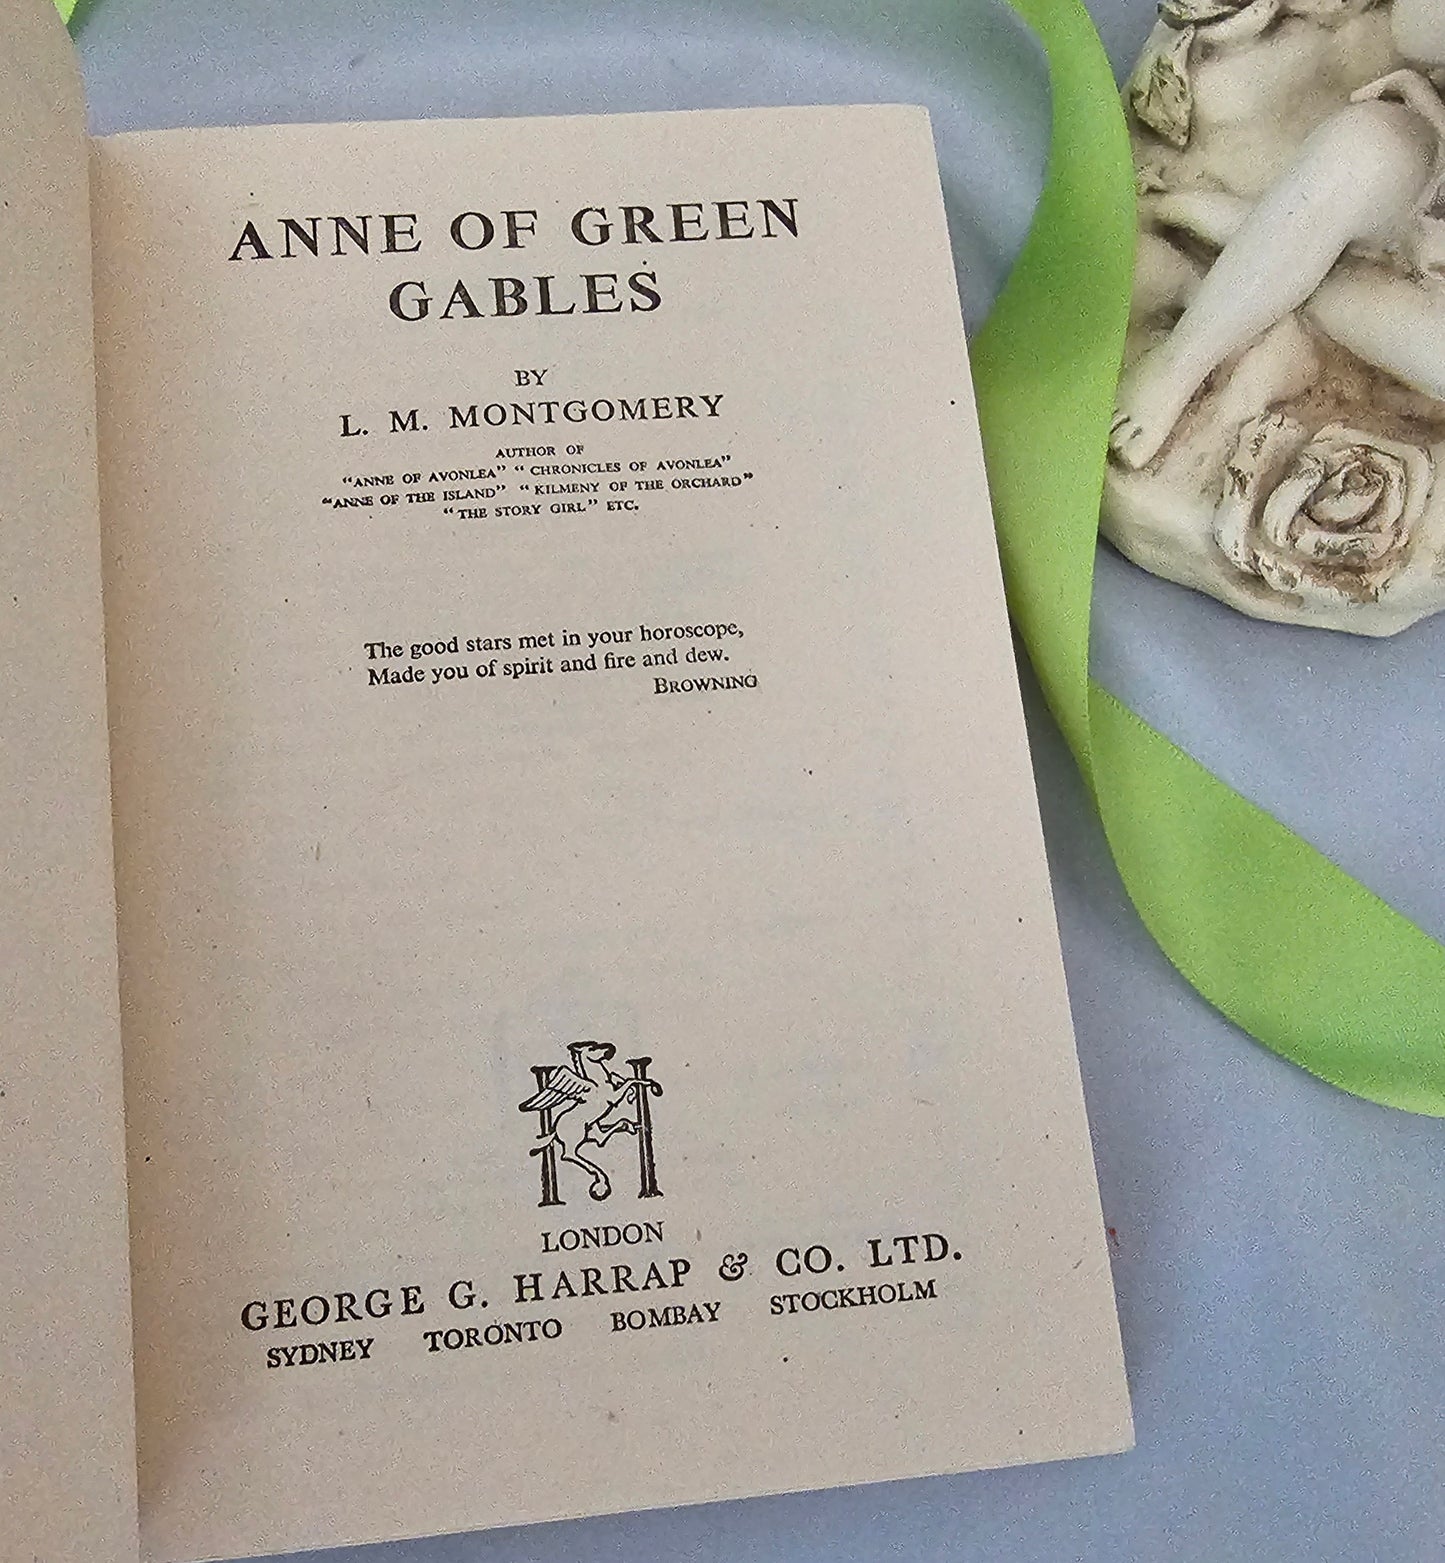 1946 Anne of Green Gables Set of Three Vintage Novels / LM Montgomery / George Harrap & Co., London / In Bright, Clean Vintage Condition